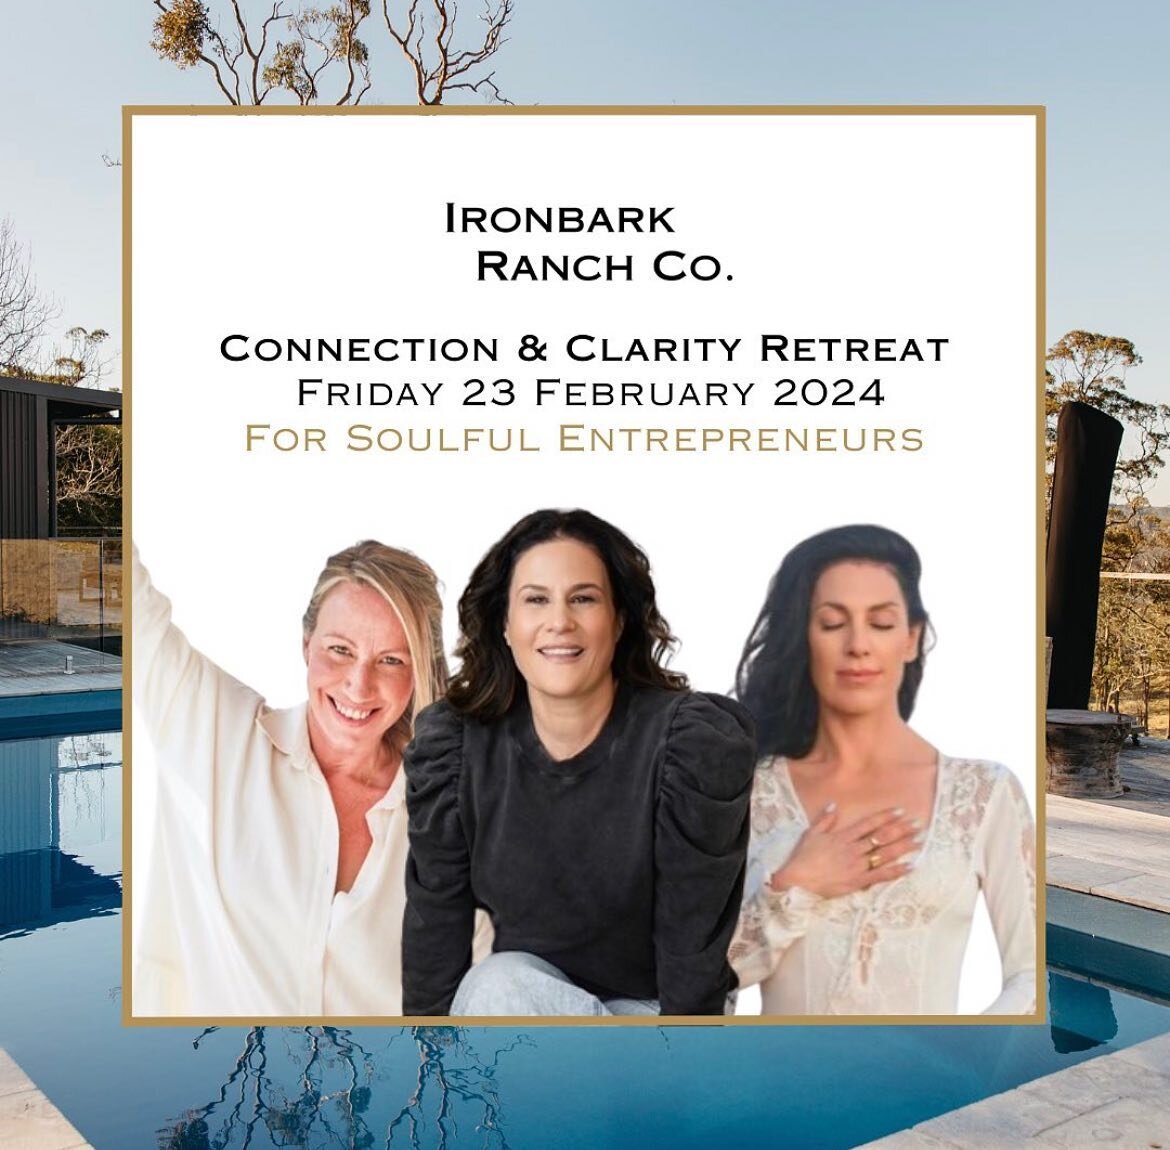 Upcoming retreat!!!! 🤸🏽🤸🏽⭐️⭐️⭐️

This one&rsquo;s going to be a goodie! ✨✨✨💃🏻

Connection &amp; Clarity Retreat - Friday the 23 February 2024

Who&rsquo;s the magic for? 
Soulful Entrepreneurs

Where&rsquo;s the magic taking place? 
At @ironbar